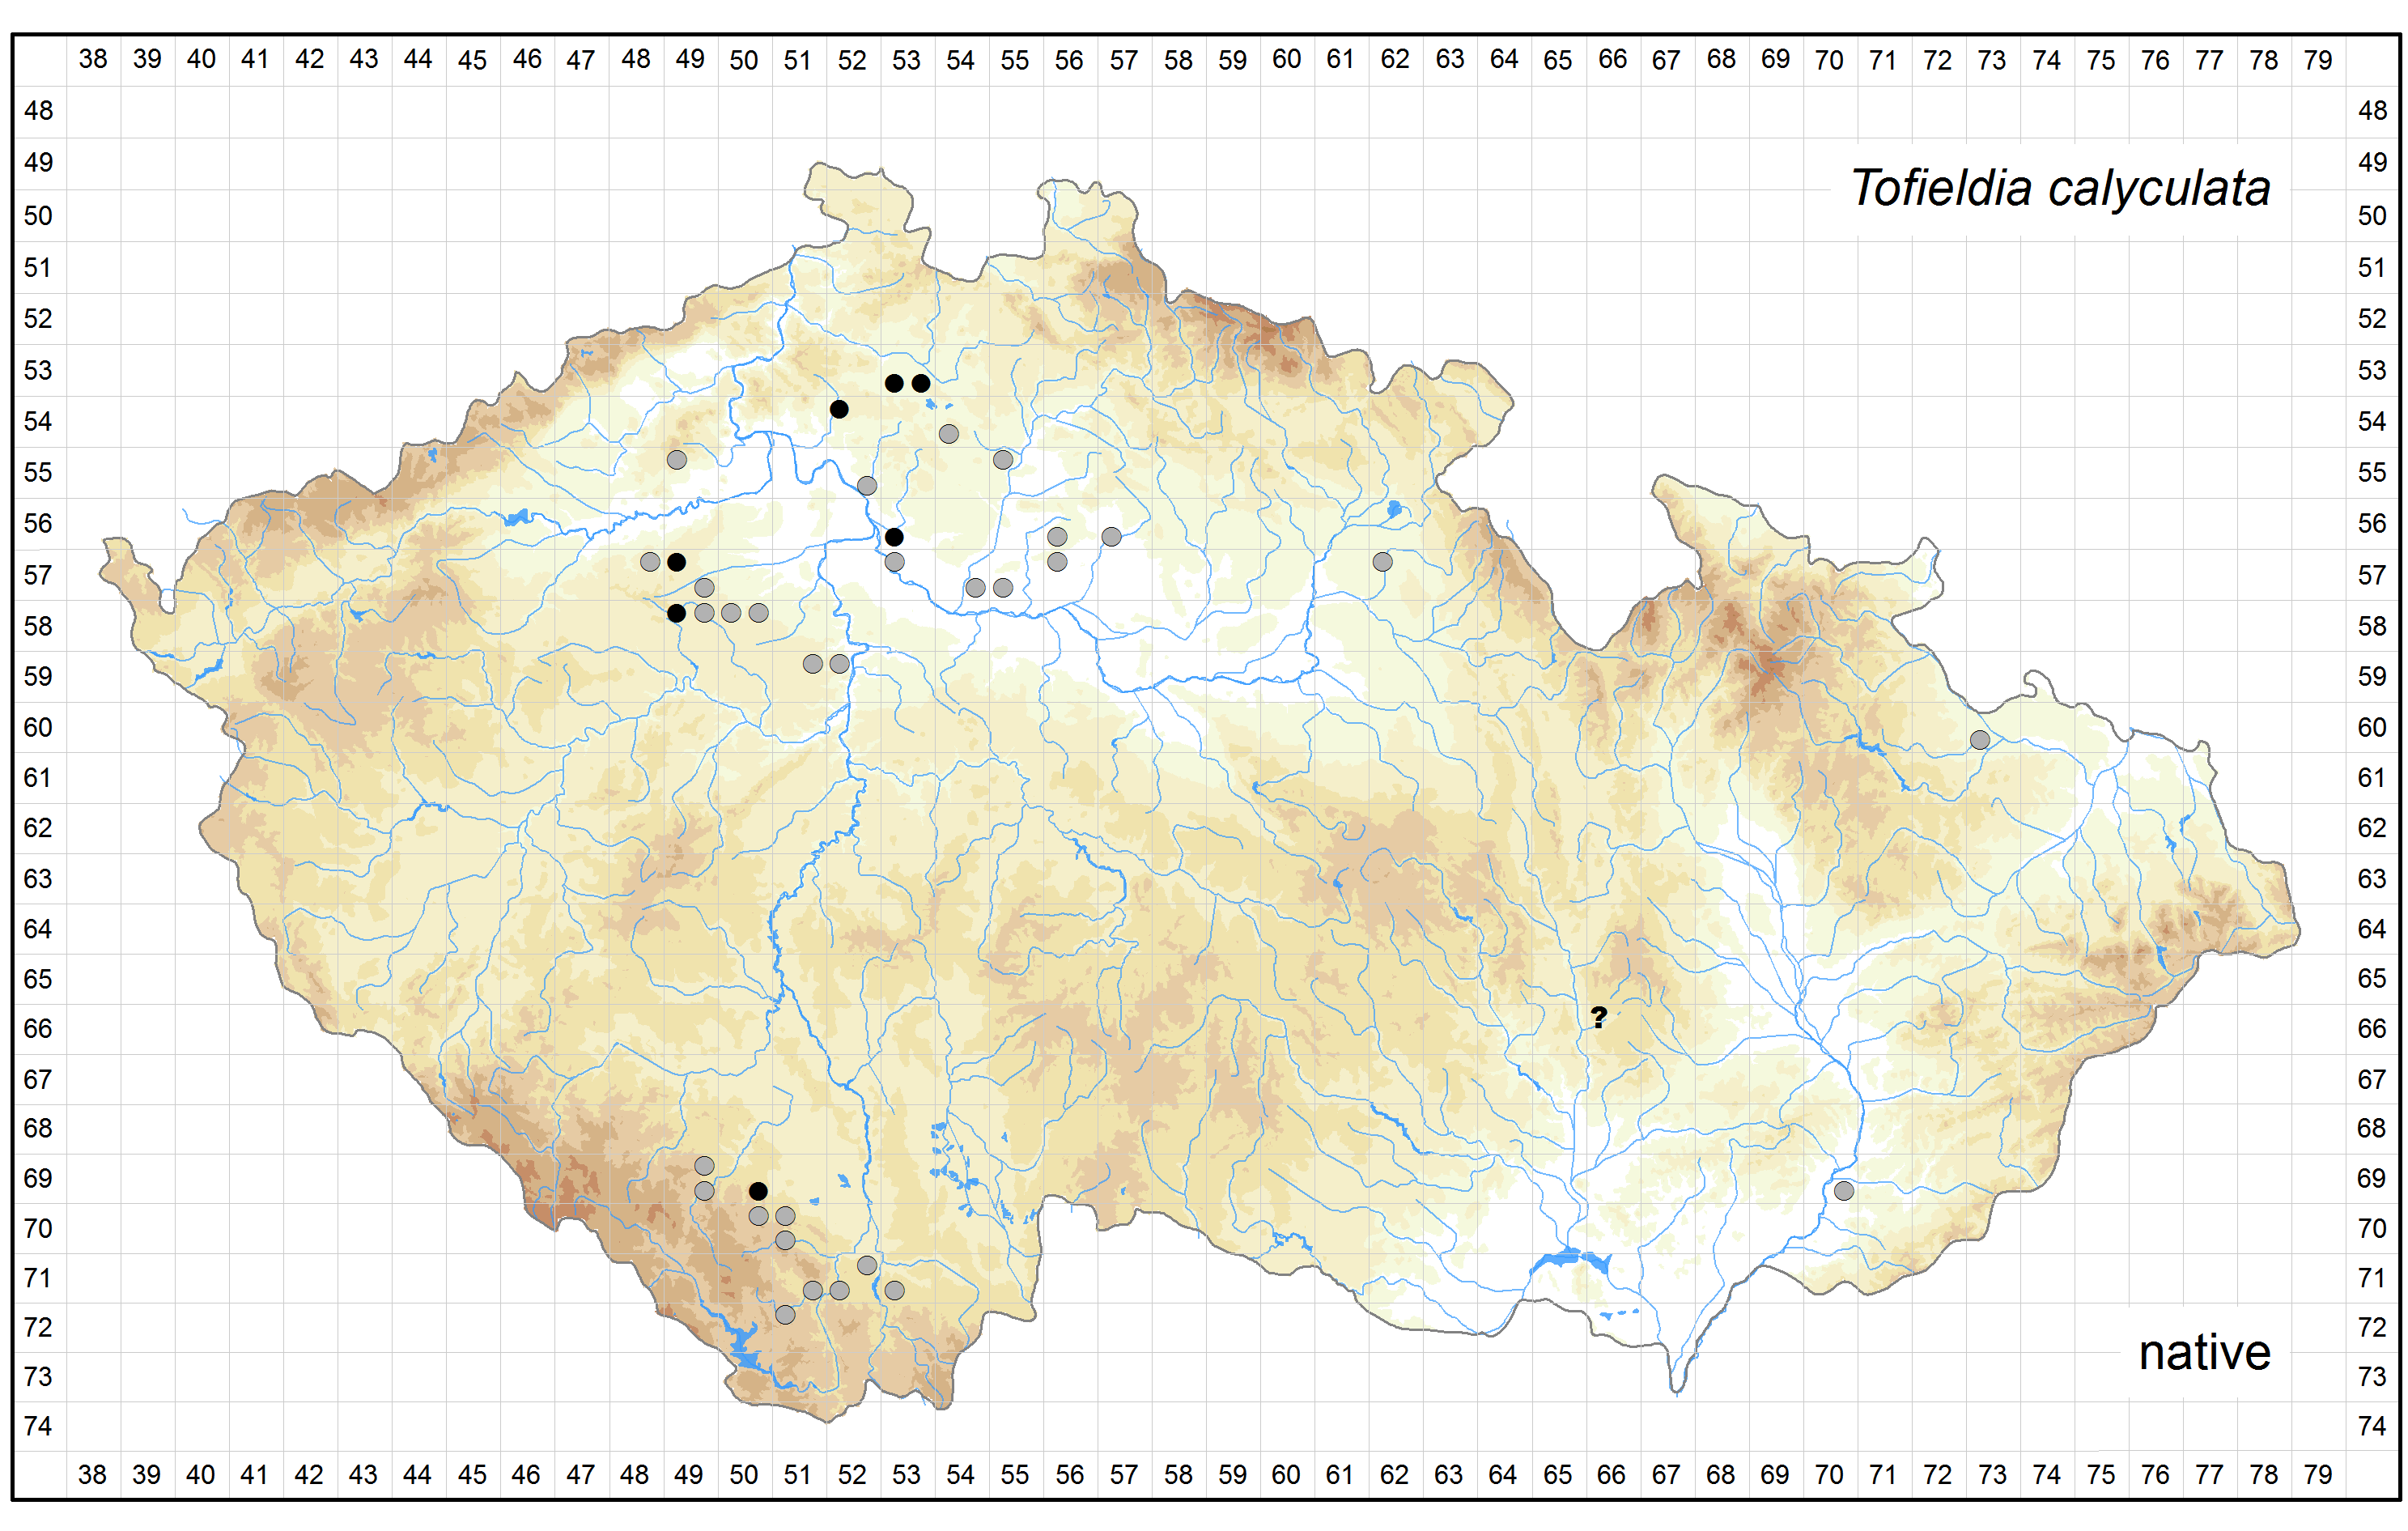 Distribution of Tofieldia calyculata in the Czech Republic Author of the map: Jitka Štěpánková Map produced on: 18-11-2015 Database records used for producing the distribution map of Tofieldia